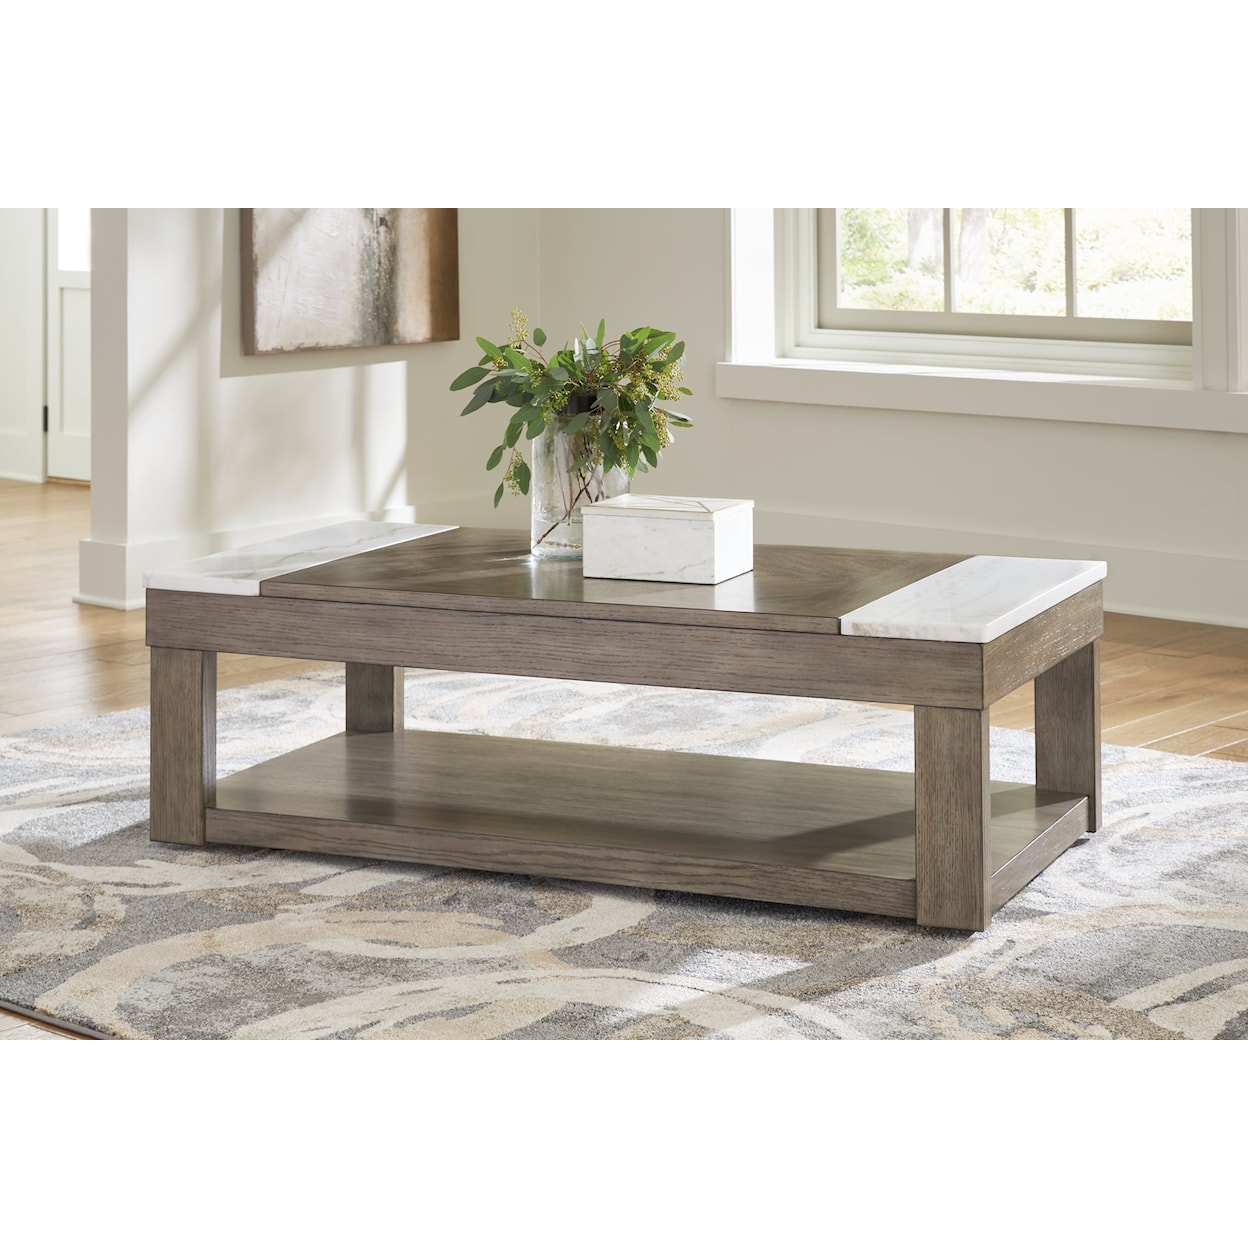 Benchcraft Loyaska Lift-top Coffee Table and 2 End Tables